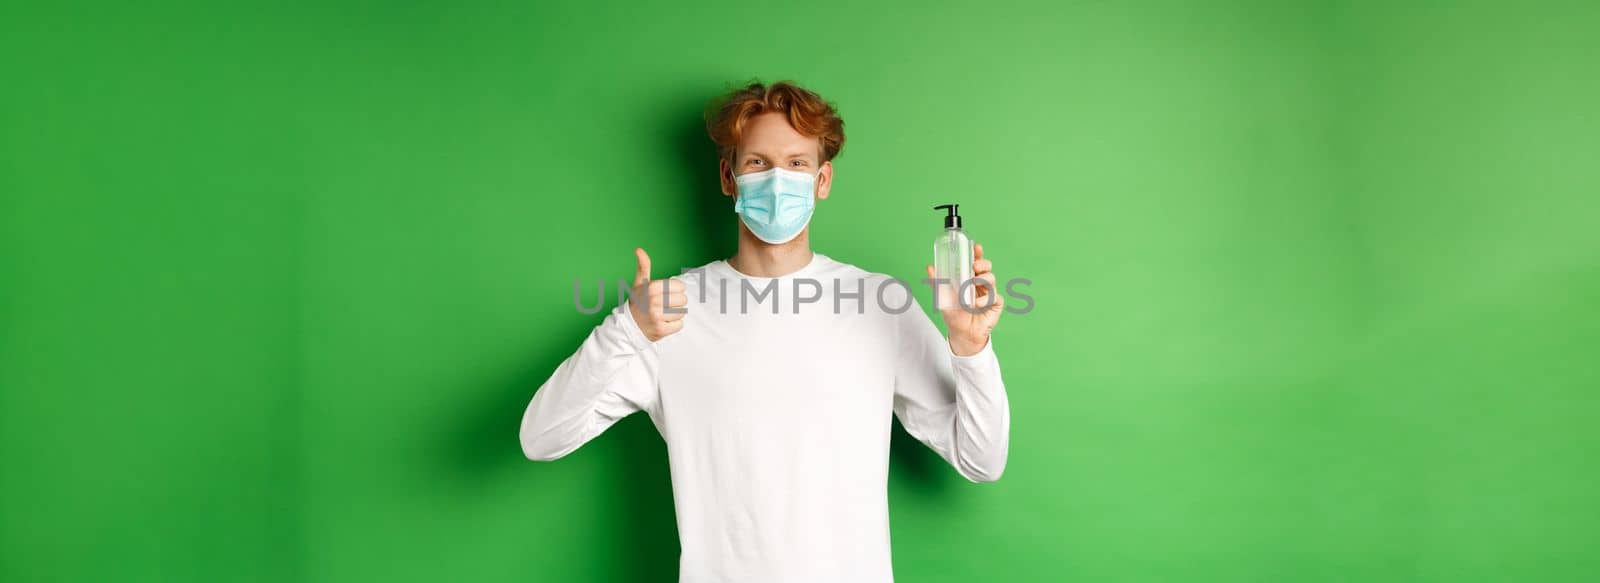 Covid-19, virus and social distancing concept. Smiling young man with red hair, wearing face mask for protection from corona, showing thumb-up and hand sanitizer, green background.